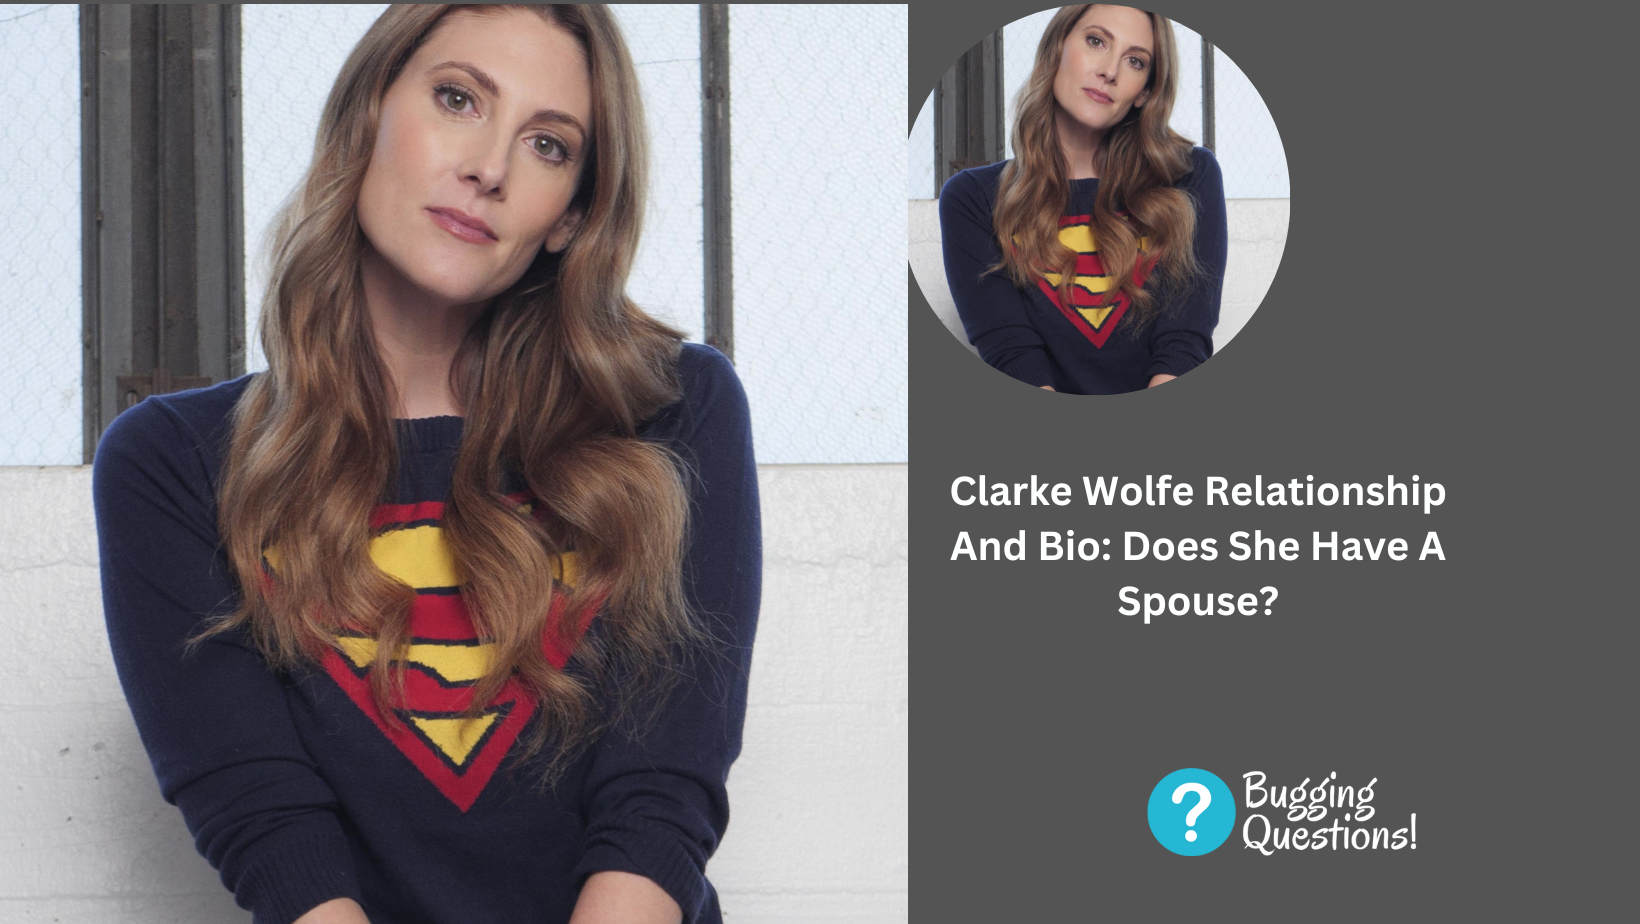 Clarke Wolfe Relationship And Bio: Does She Have A Spouse?